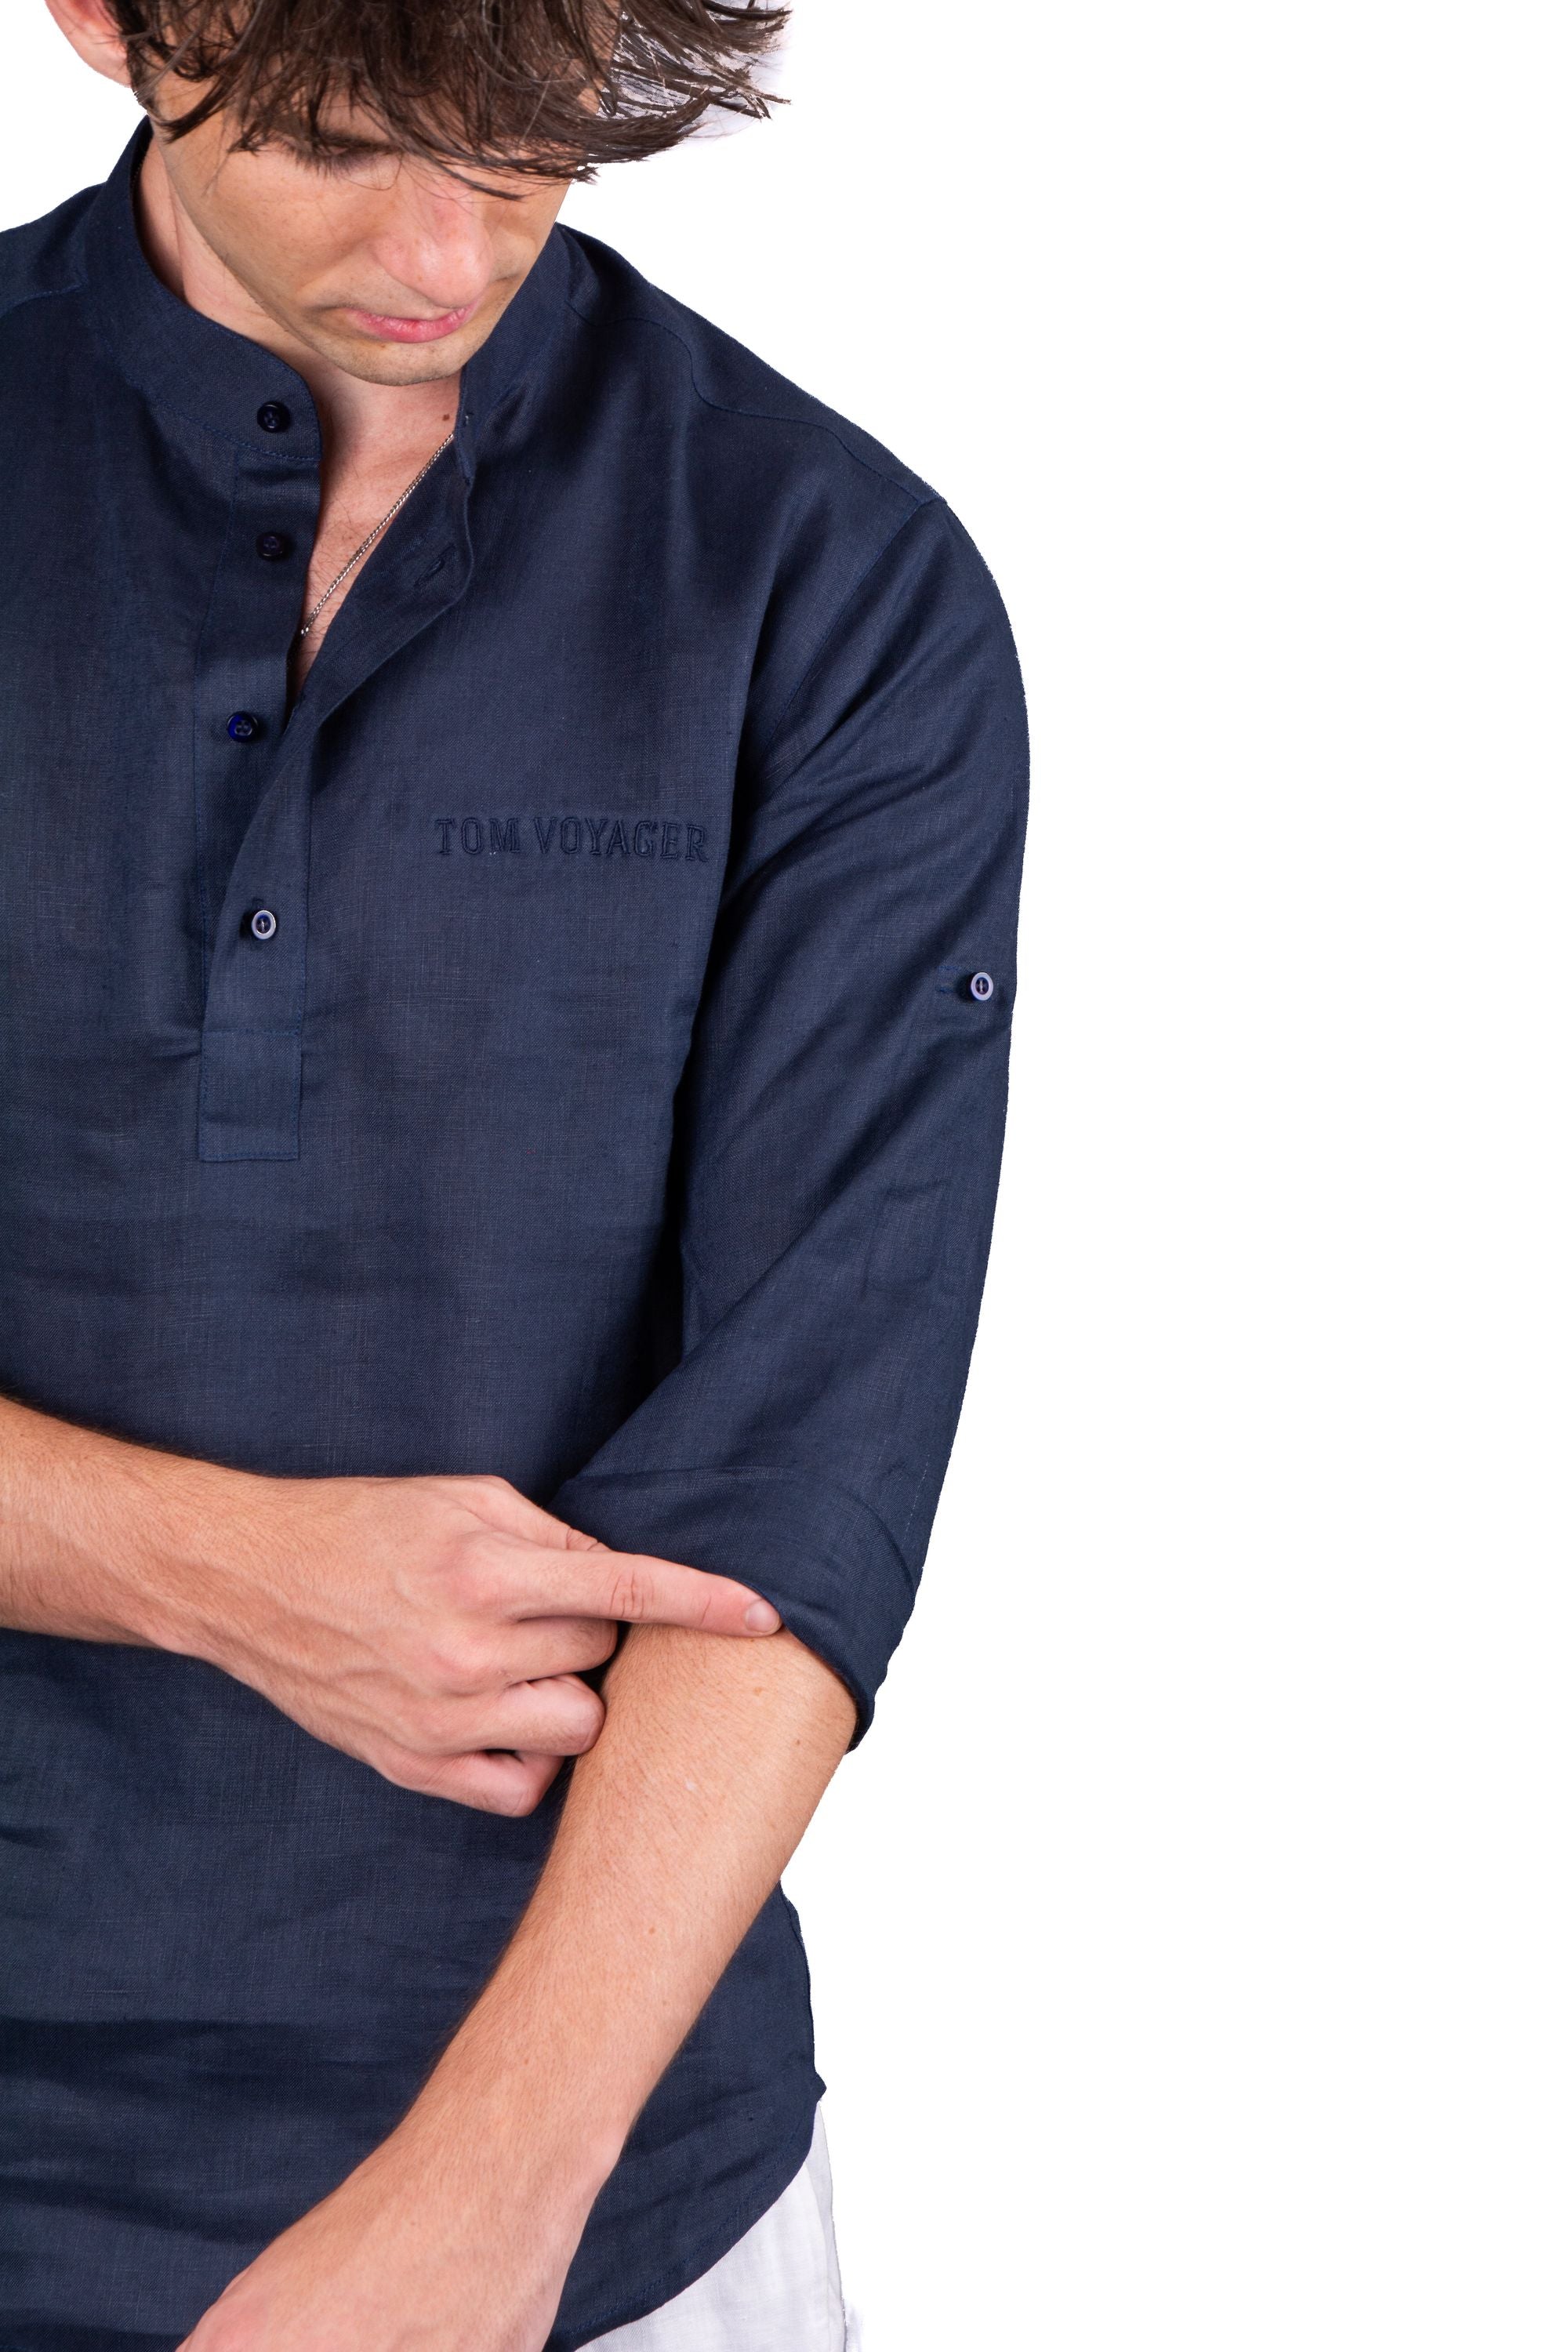 Flush mens linen shirts - linen shirts - navy blue - close up - stylish and perfect for every occasion